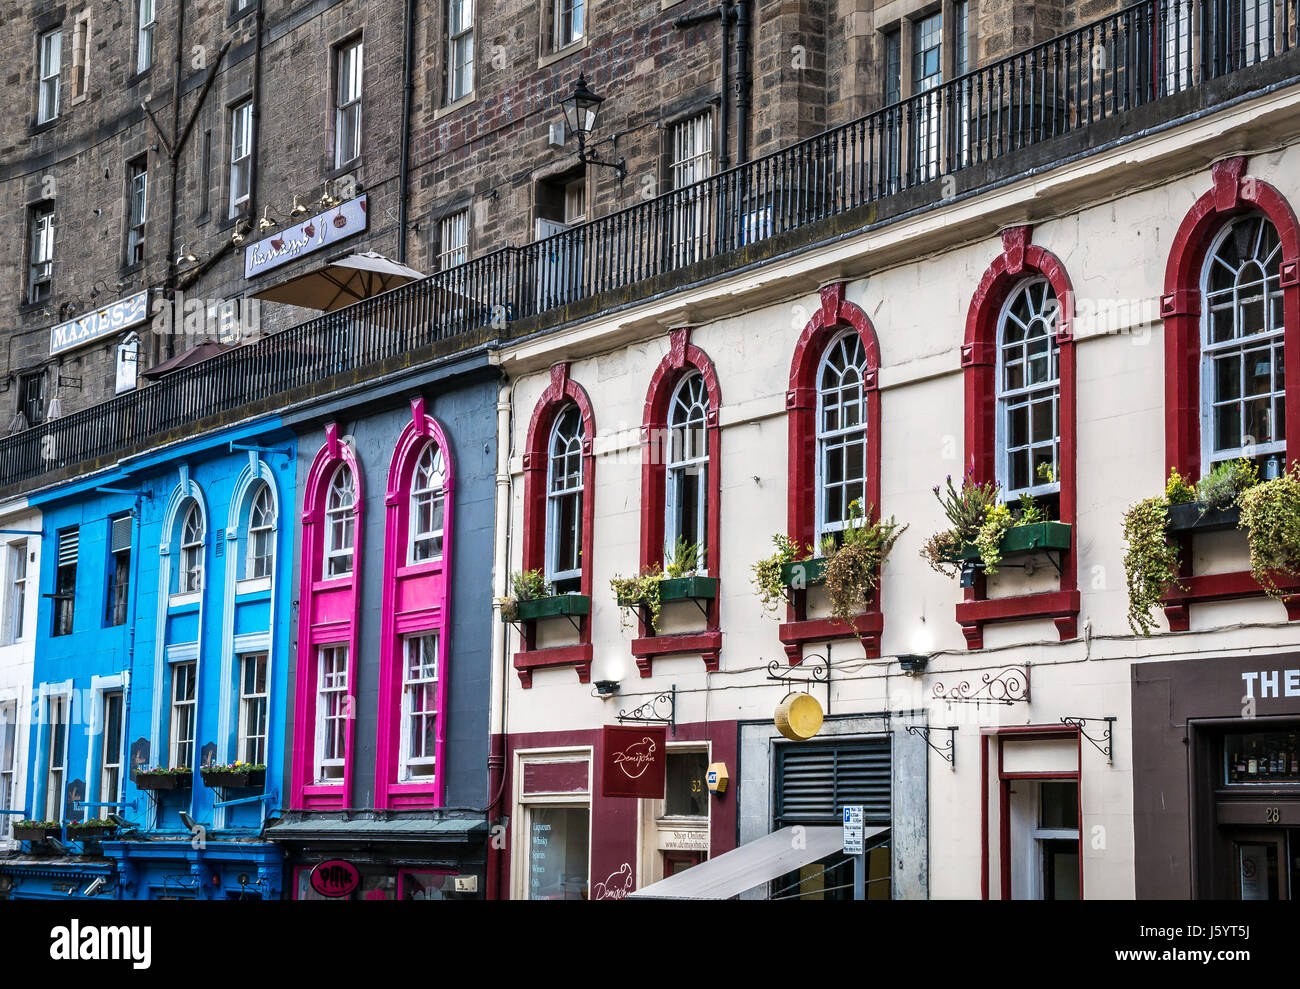 Colourful row of arched windows overlooking Victoria Street, Old Town, Edinburgh, Scotland, UK, with row of shops Stock Photo